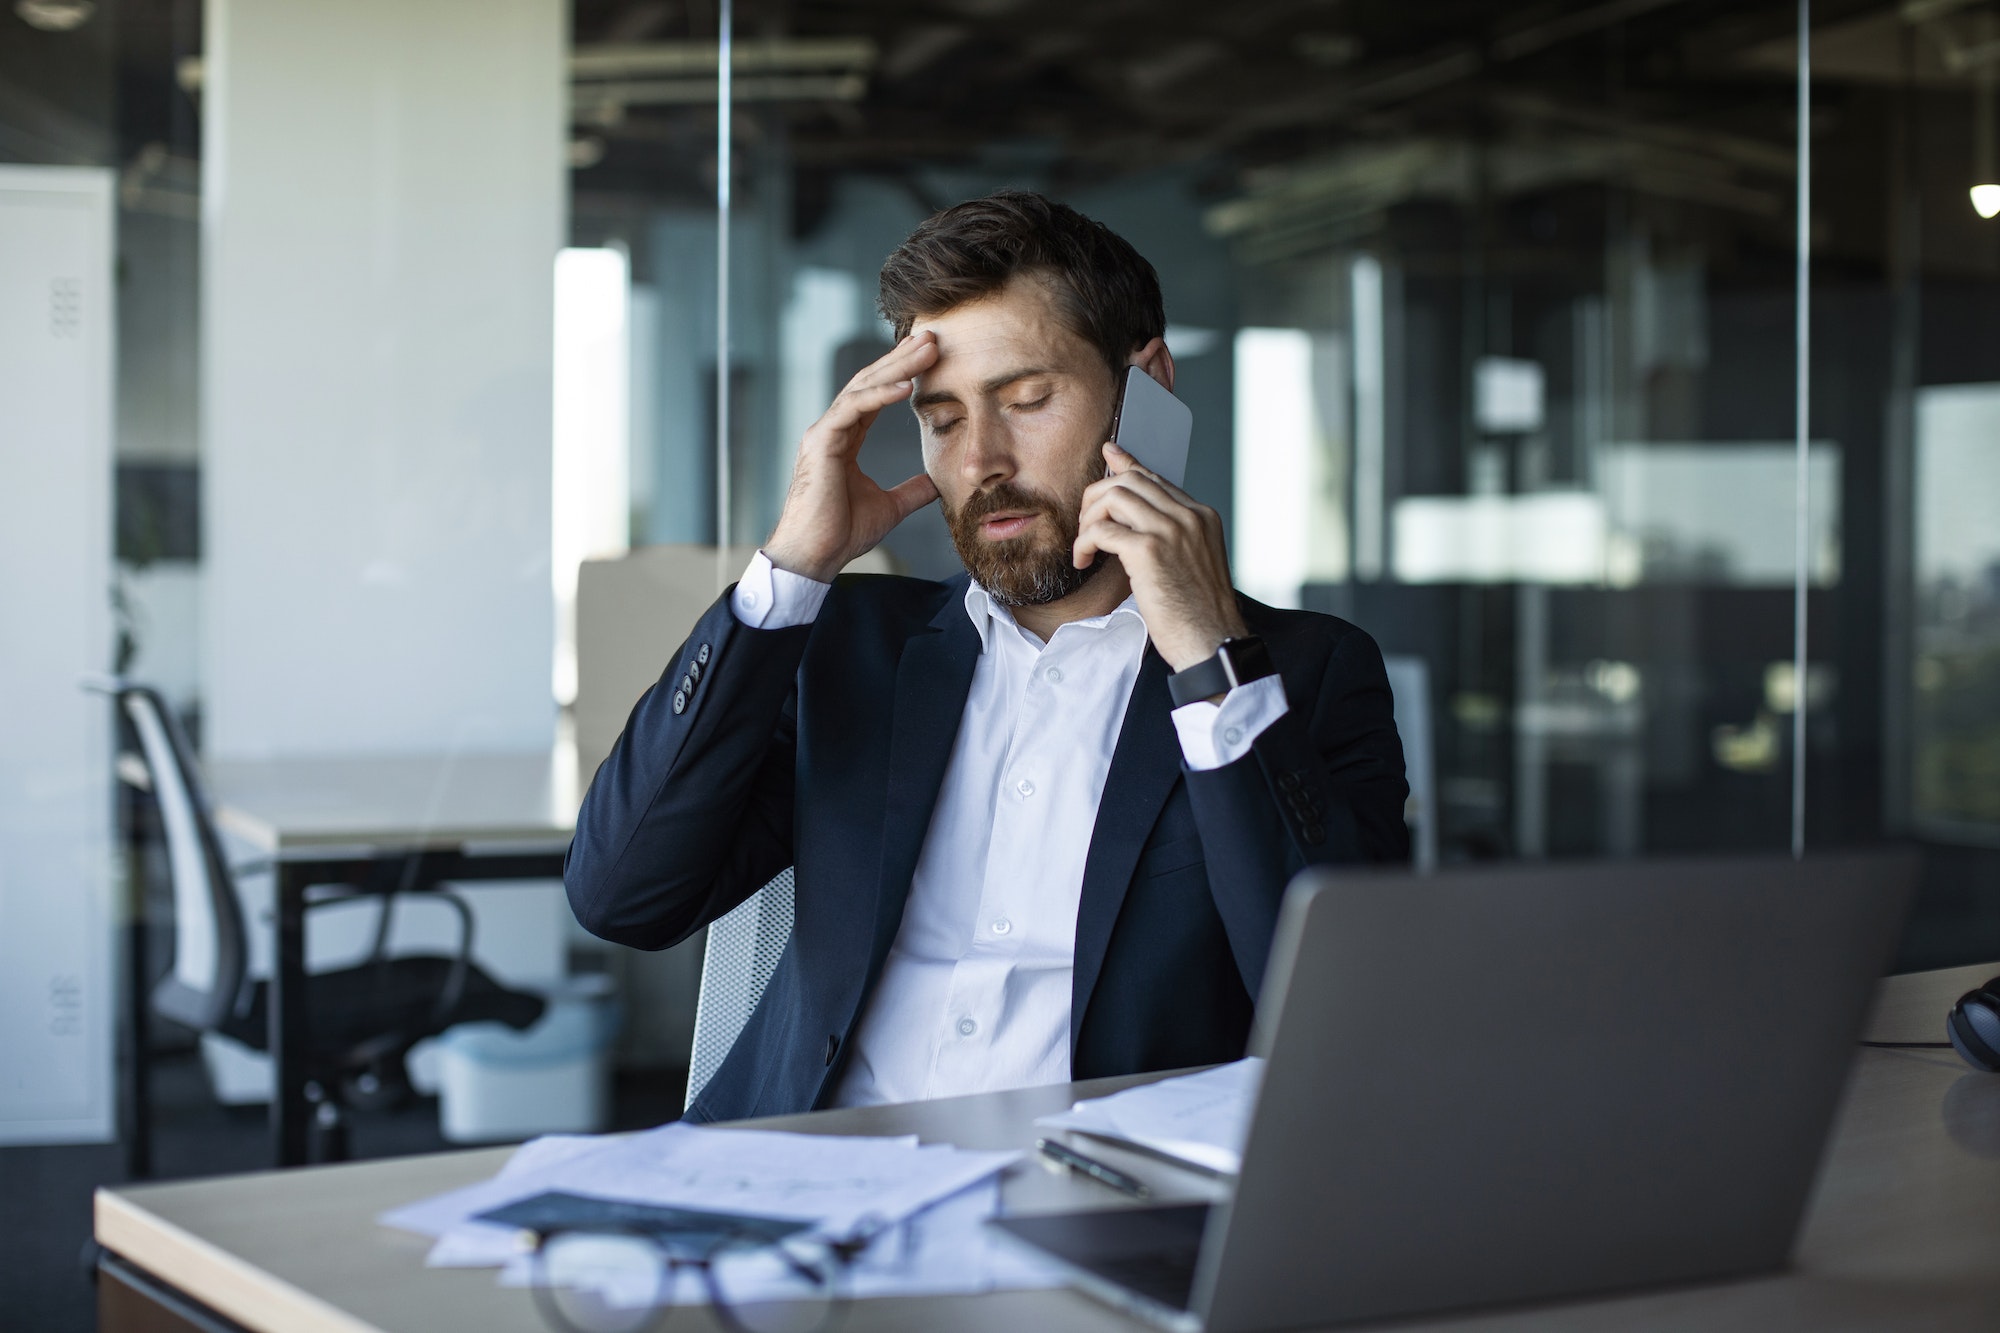 Concerned male entrepreneur talking on cellphone and touching head in stress, having unpleasant